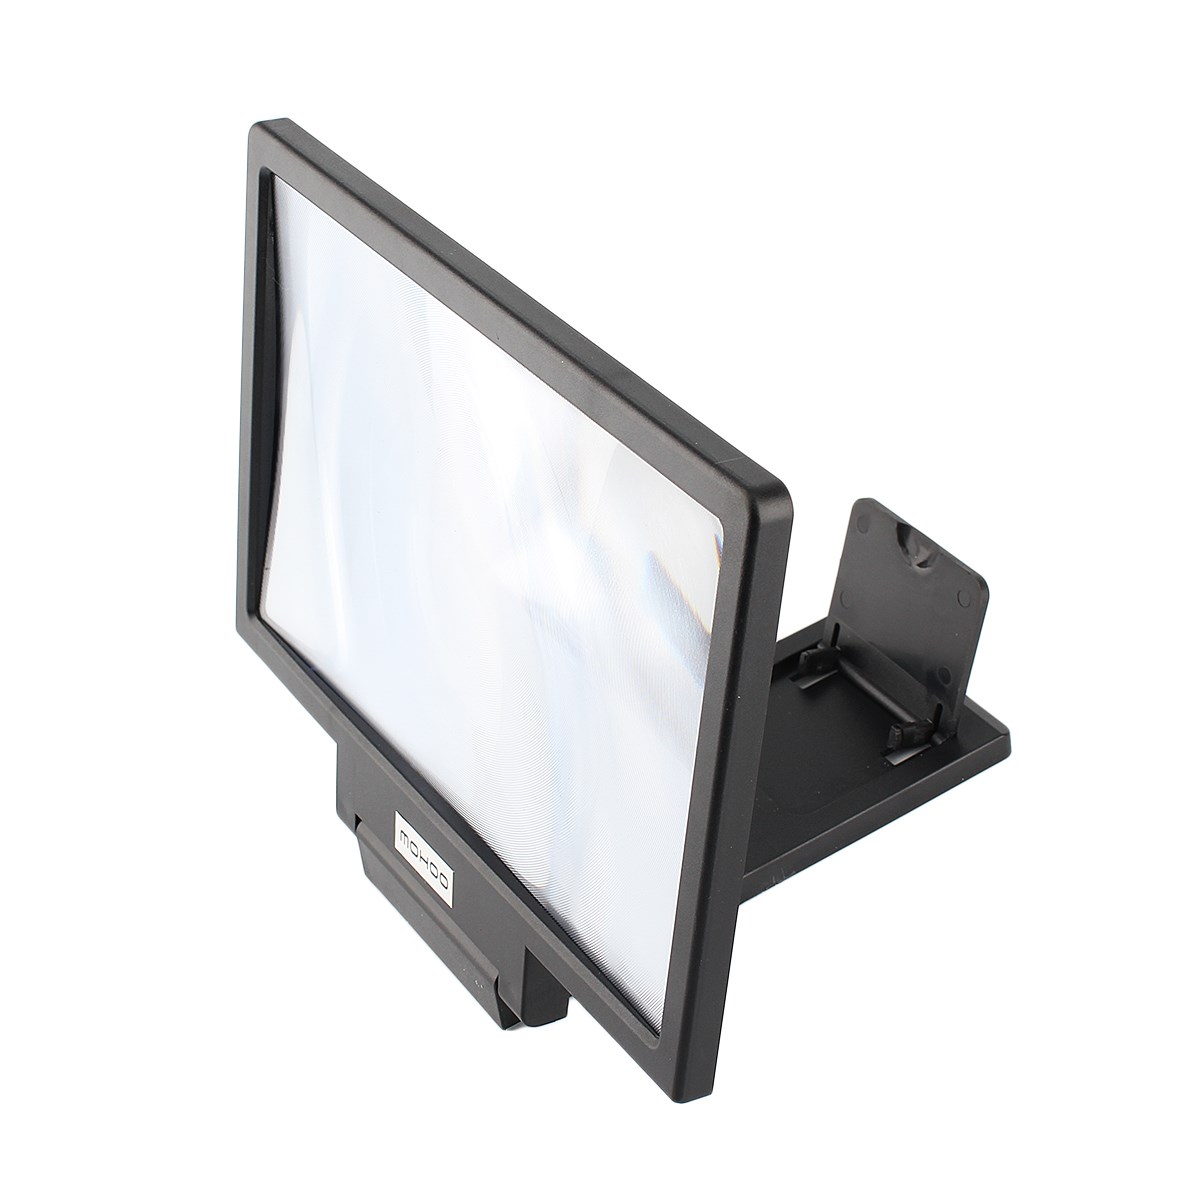 Portable Mobile Phone Screen Amplifier 3D Video Watching Enlarger For iPhone 6 6plus 5 5S S6